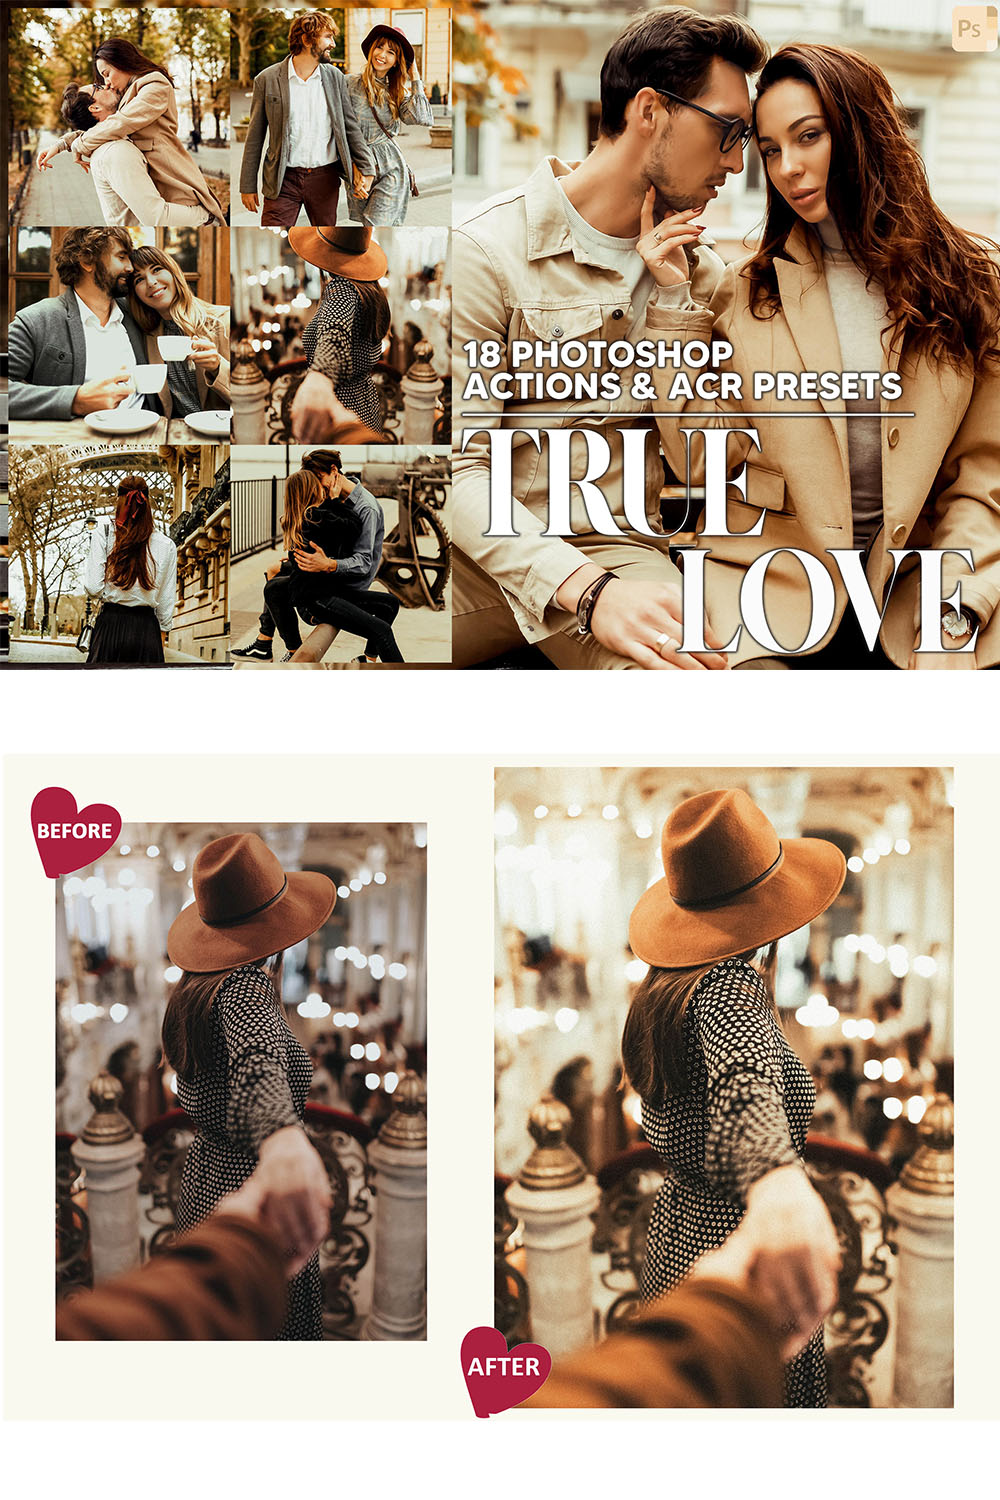 18 Photoshop Actions, True Love Ps Action, Romance ACR Preset, Warm Ps Filter, Atn Portrait And Lifestyle Theme For Instagram, Blogger pinterest preview image.